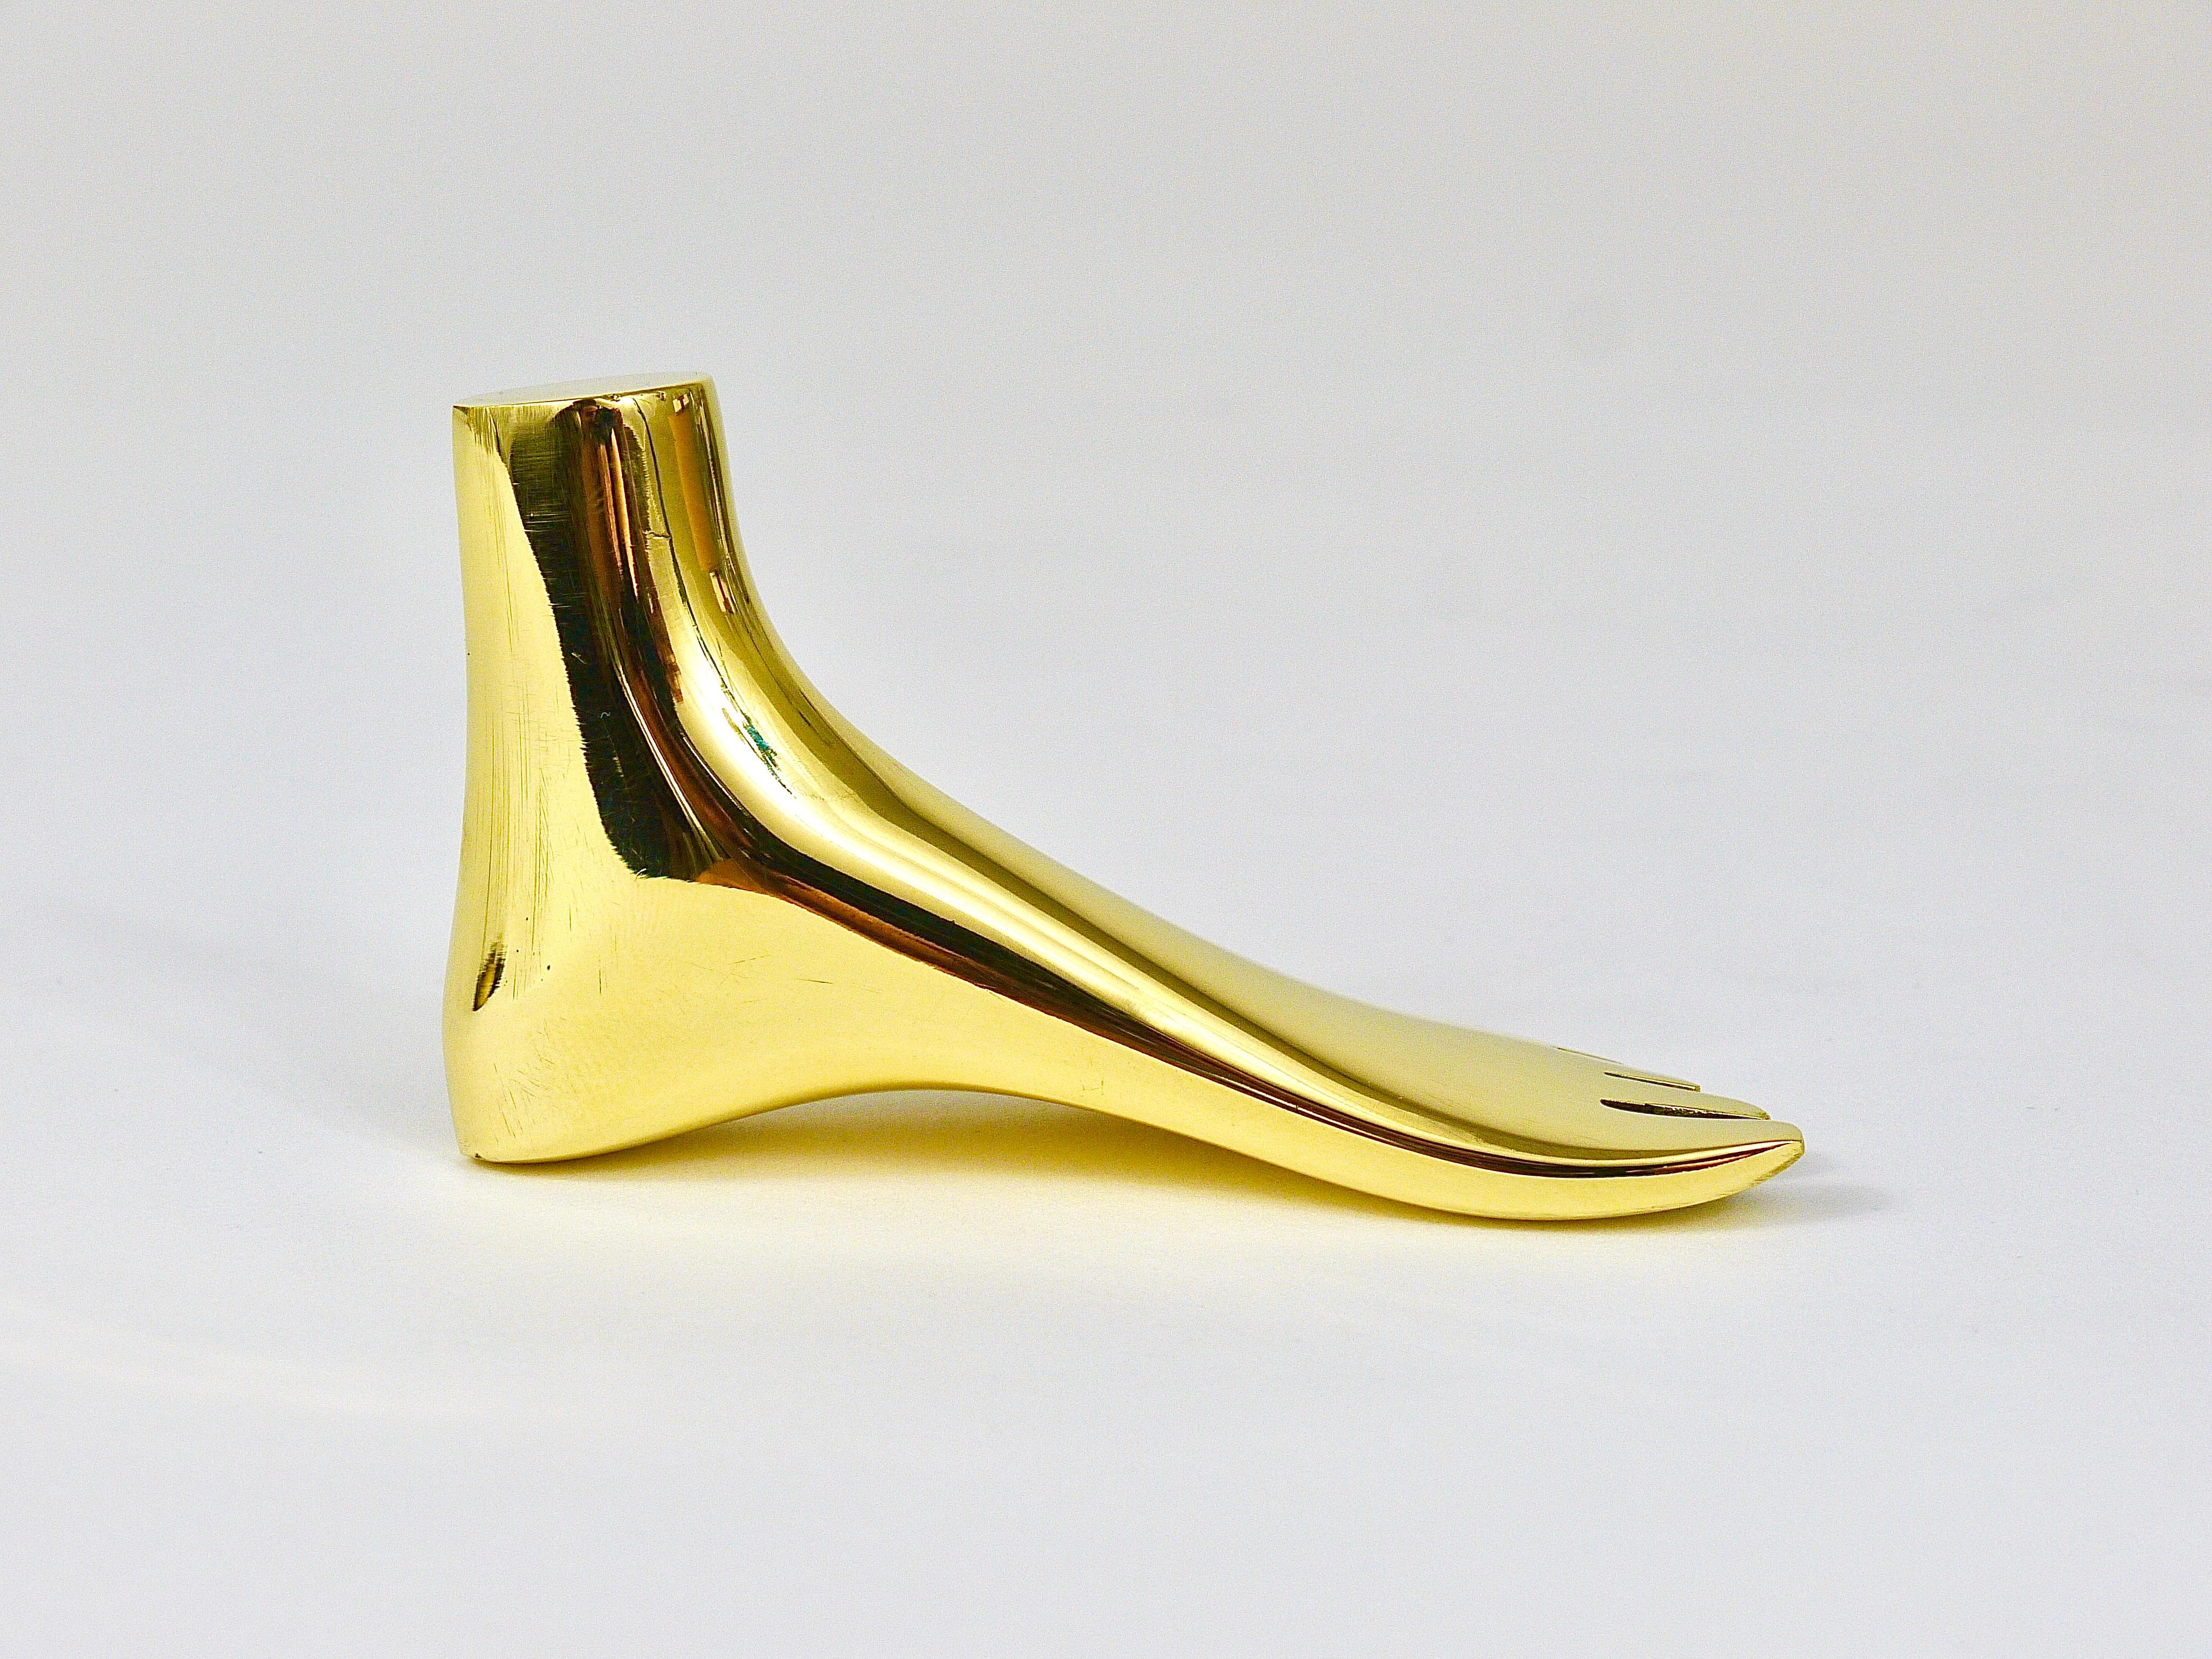 Signed Carl Auböck Midcentury Brass Foot Paperweight Handmade Sculpture For Sale 7